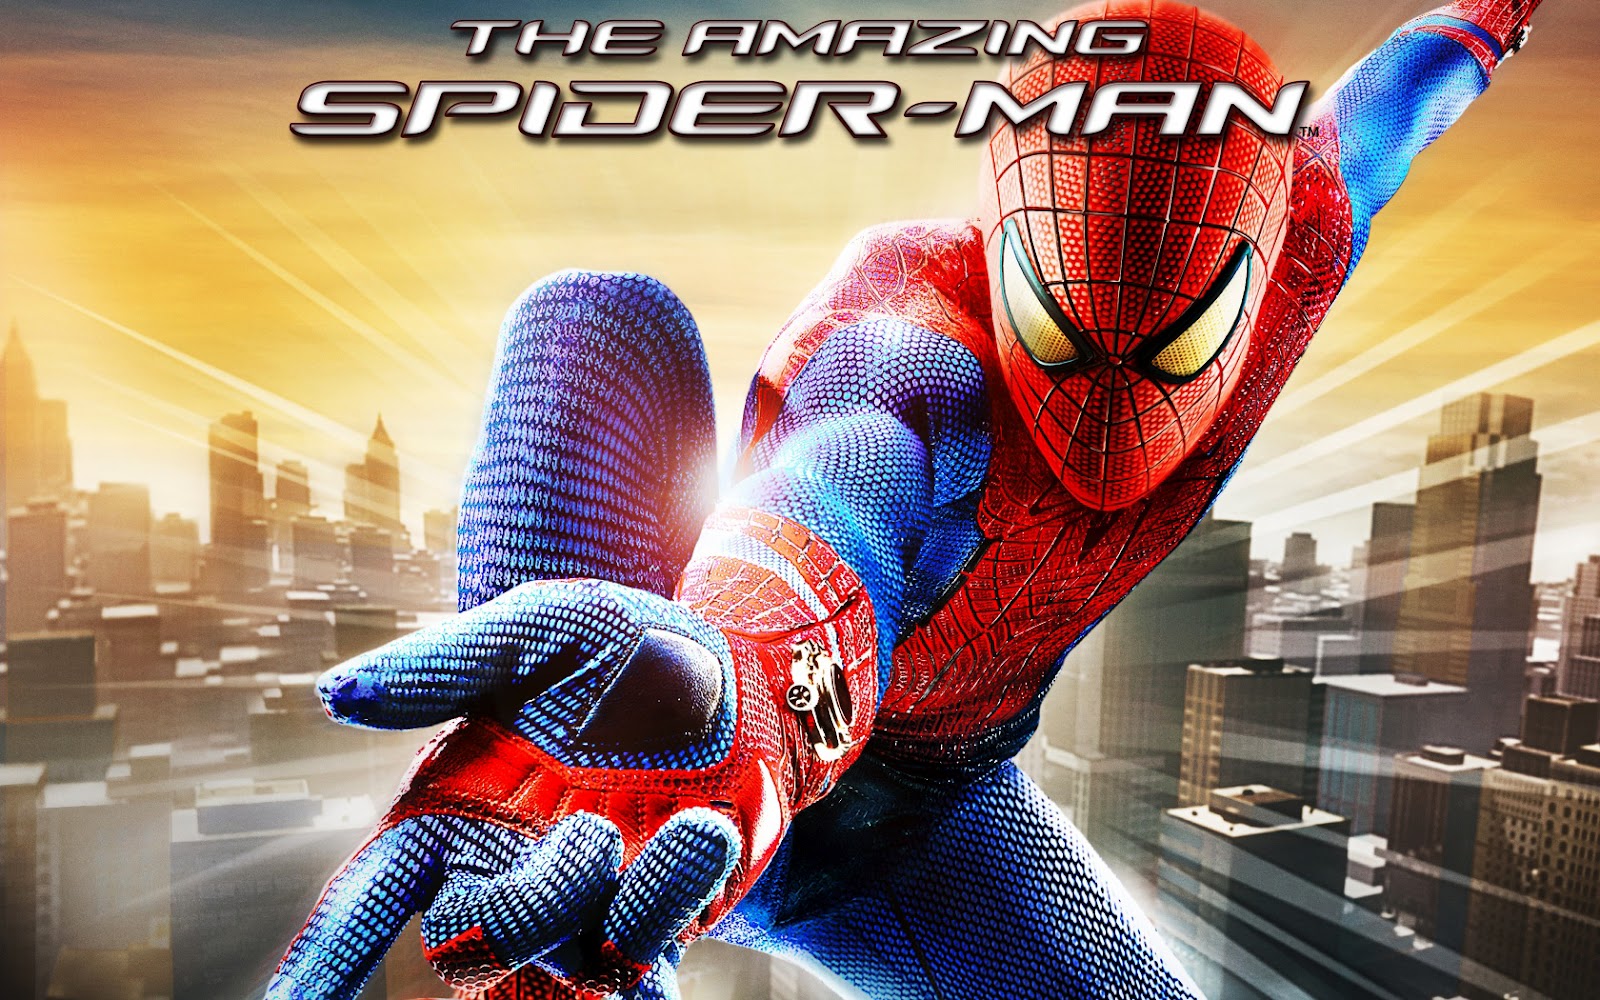 Central Wallpaper: The Amazing SpiderMan 4 HD Wallpapers and Posters